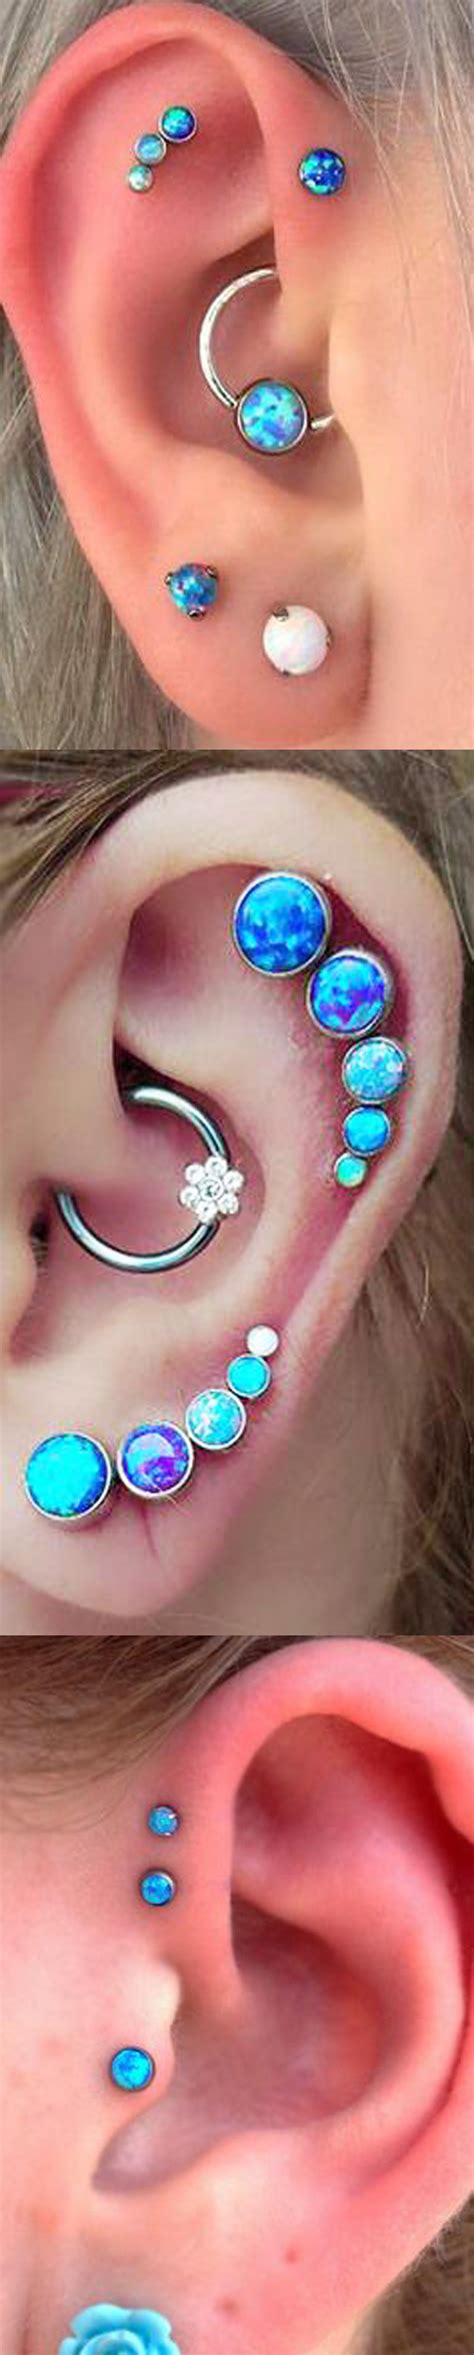 Multiple Ear Piercing Ideas Combinations At Cartilage